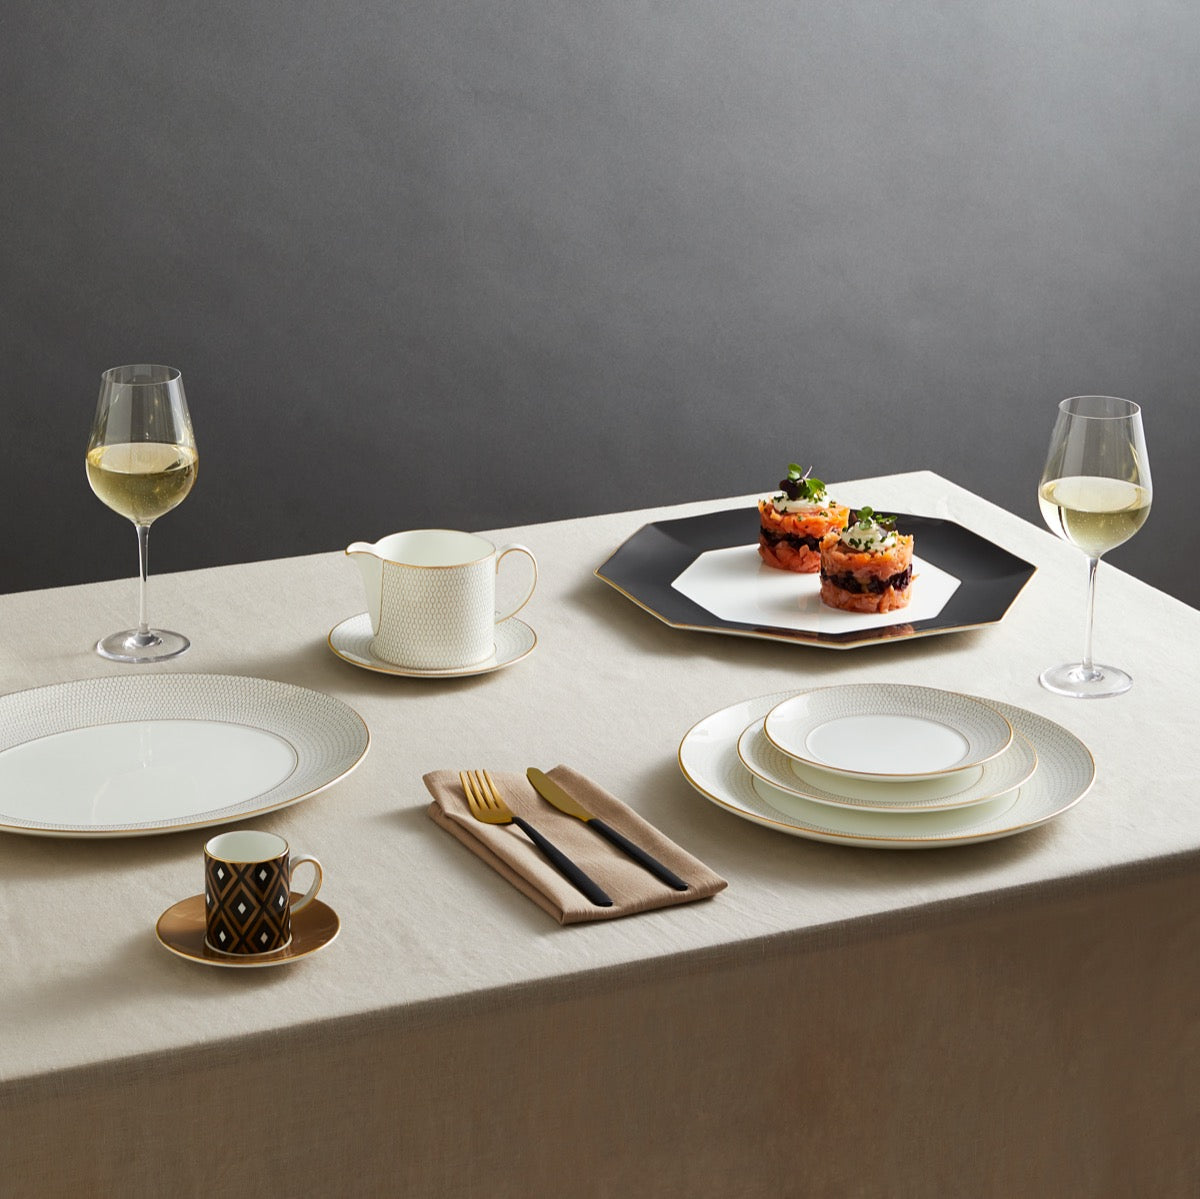 Gio Gold four piece Dinner set from Wedgwood